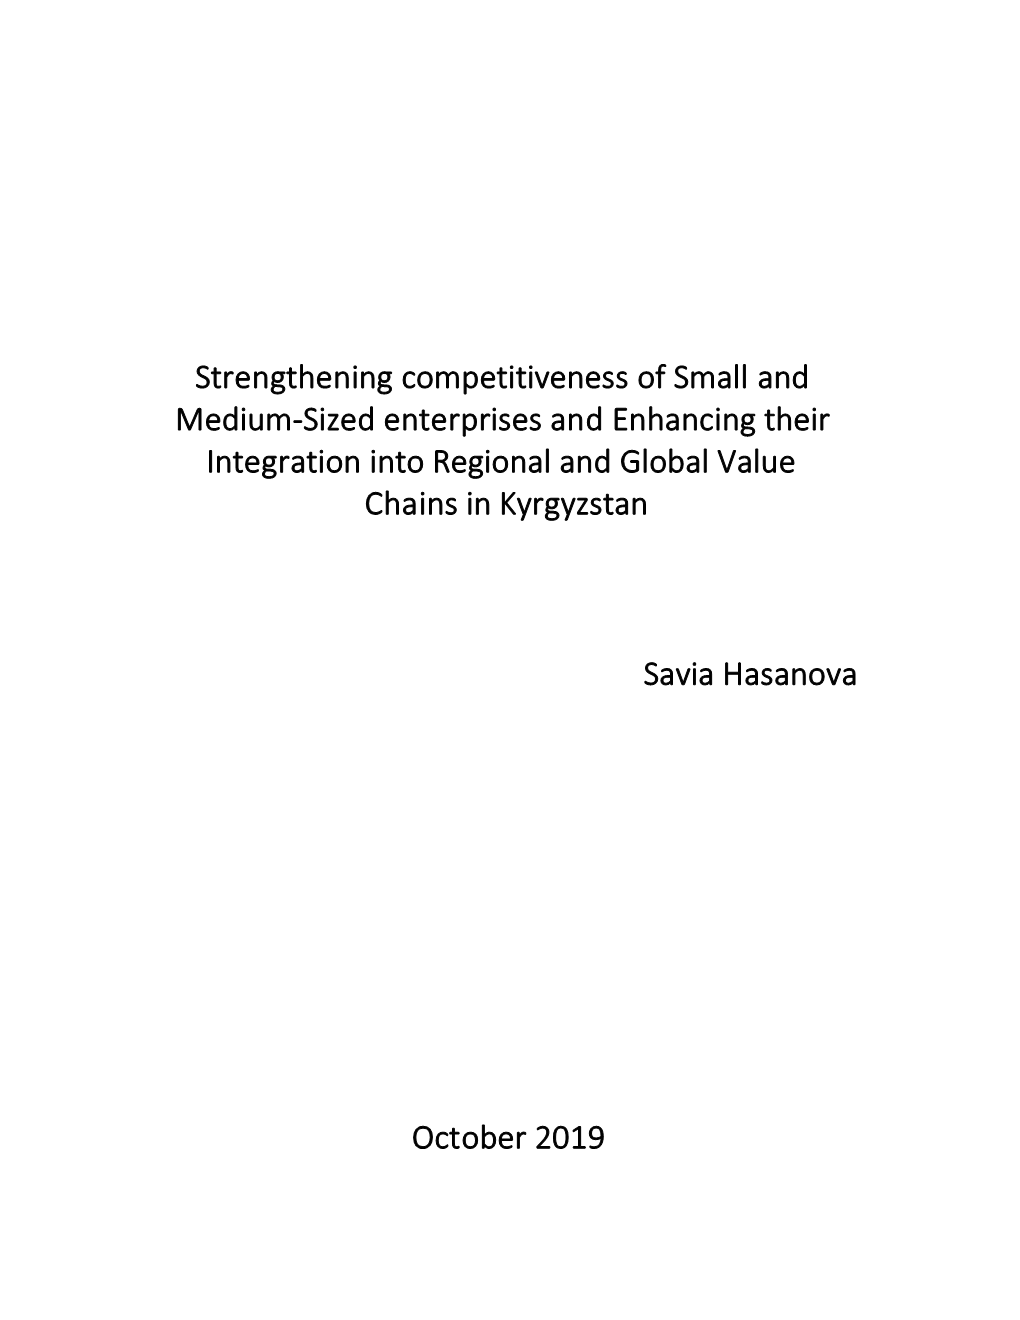 Strengthening Competitiveness of Small and Medium-Sized Enterprises and Enhancing Their Integration Into Regional and Global Value Chains in Kyrgyzstan